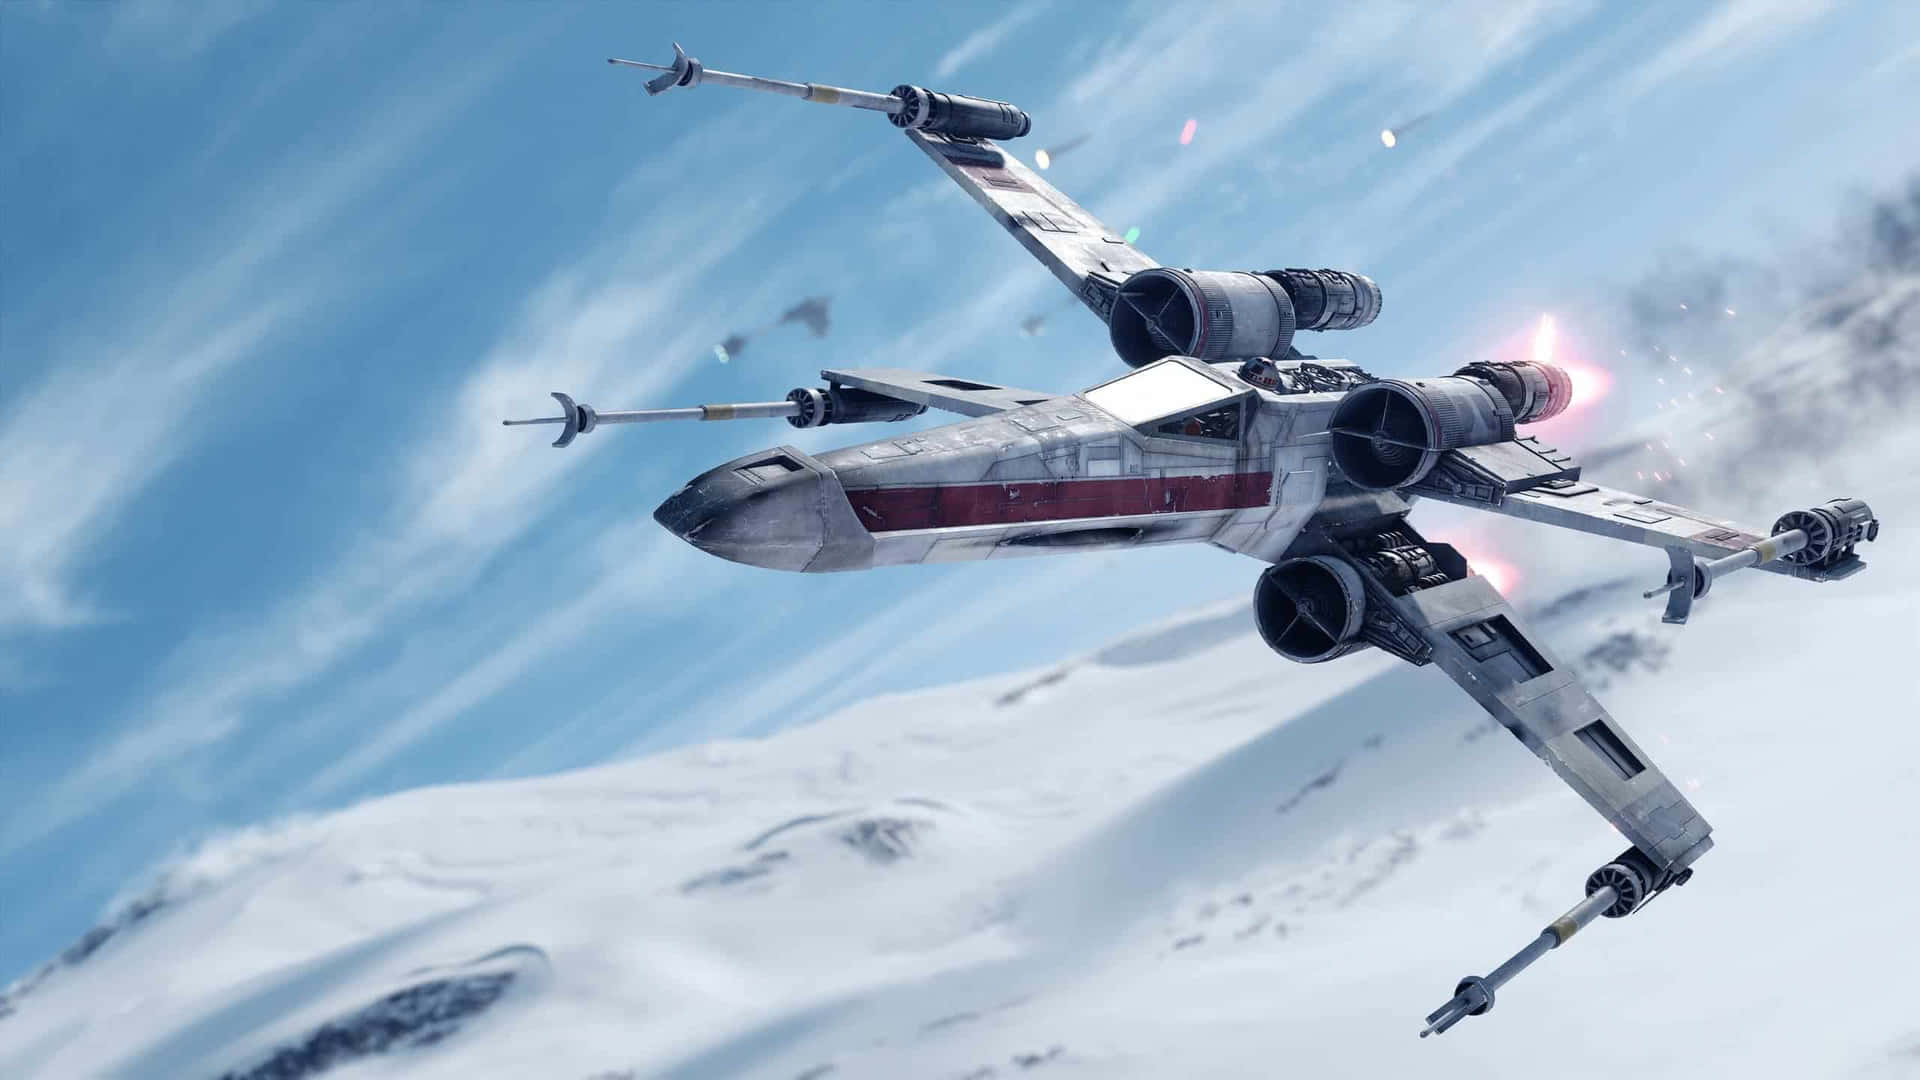 An X-Wing pilot braves the cold of space as they take on their mission. Wallpaper